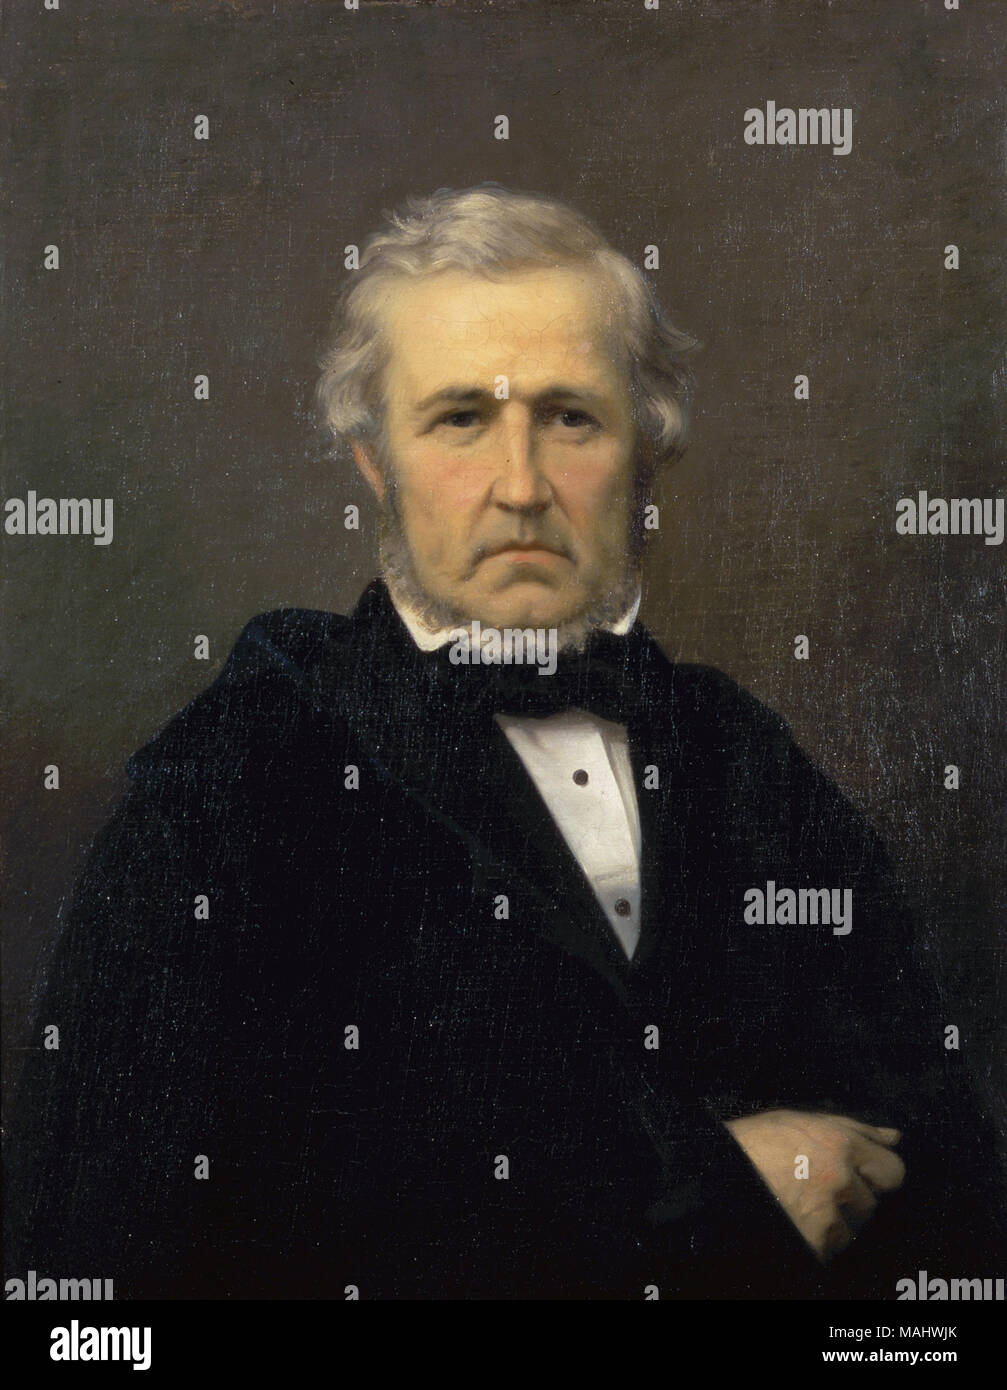 Oil portrait of Jean Baptiste Sarpy, prosperous merchant in St. Louis. A great-grandson of Madame Chouteau, he joined the family's fur trading business, later branching out into other commercial enterprises. Title: Portrait of Jean Baptiste Sarpy  . circa 1850. Stock Photo